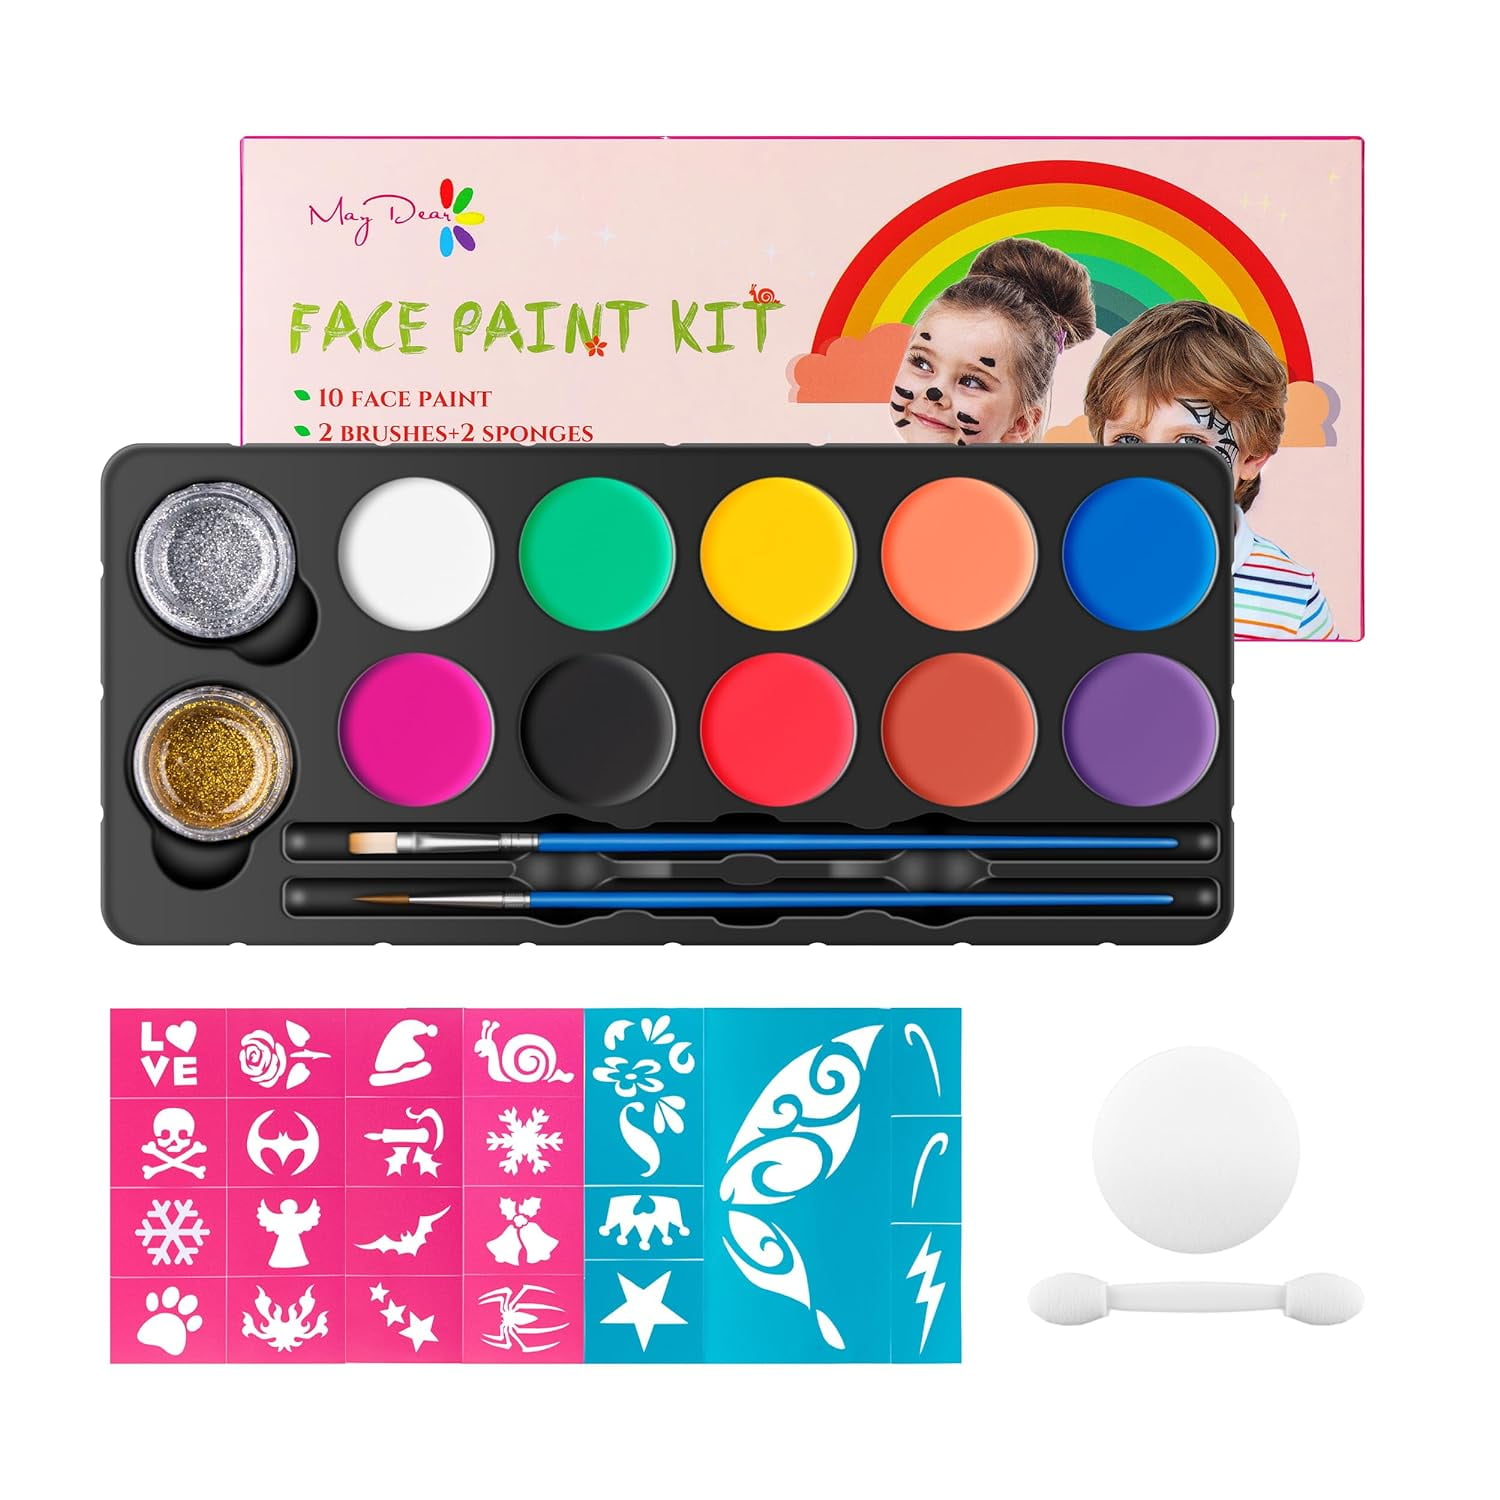 Zenovika Face Painting Kit for Kids - Non-Toxic and Hypoallergenic Face  Paint Kit with 28 Colors, Stencils, Book, and Professional Halloween Makeup  Kit - Safe and Easy to Use Face Paint Kit